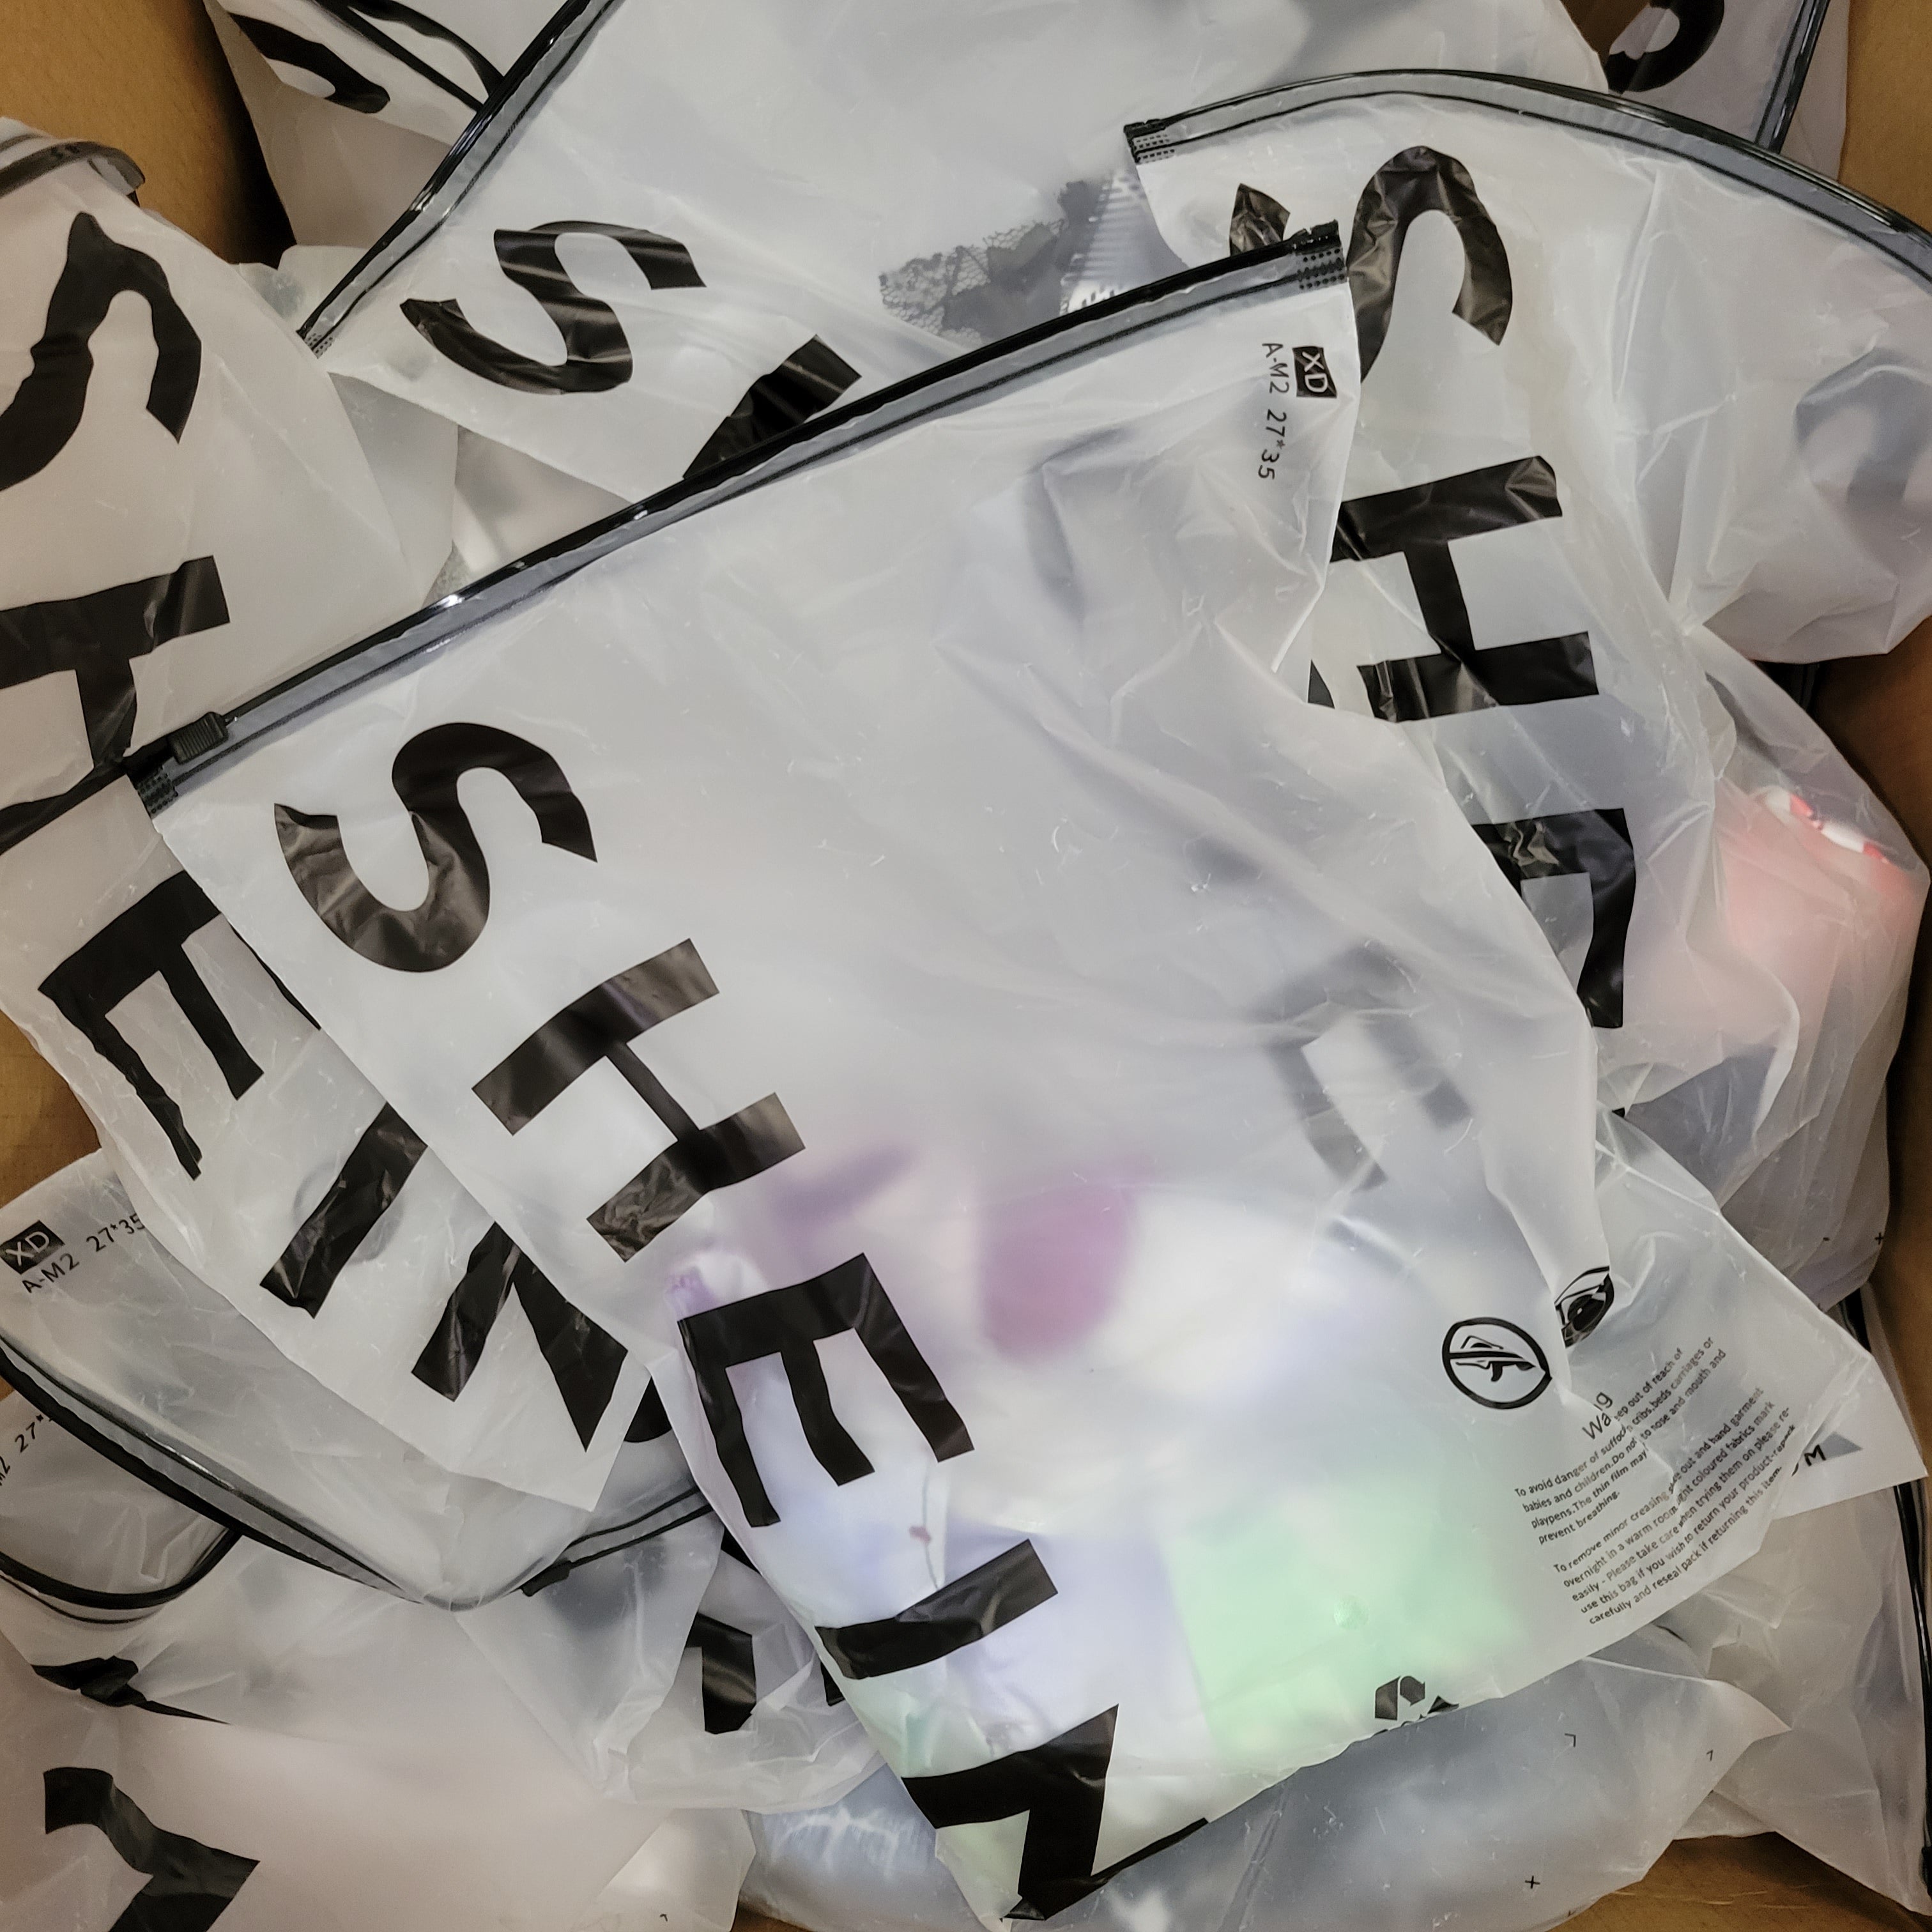 SHEIN Mystery Bundle, Mixed Clothing Apparel, 50 Units | FREE SHIPPING (8094590370030)